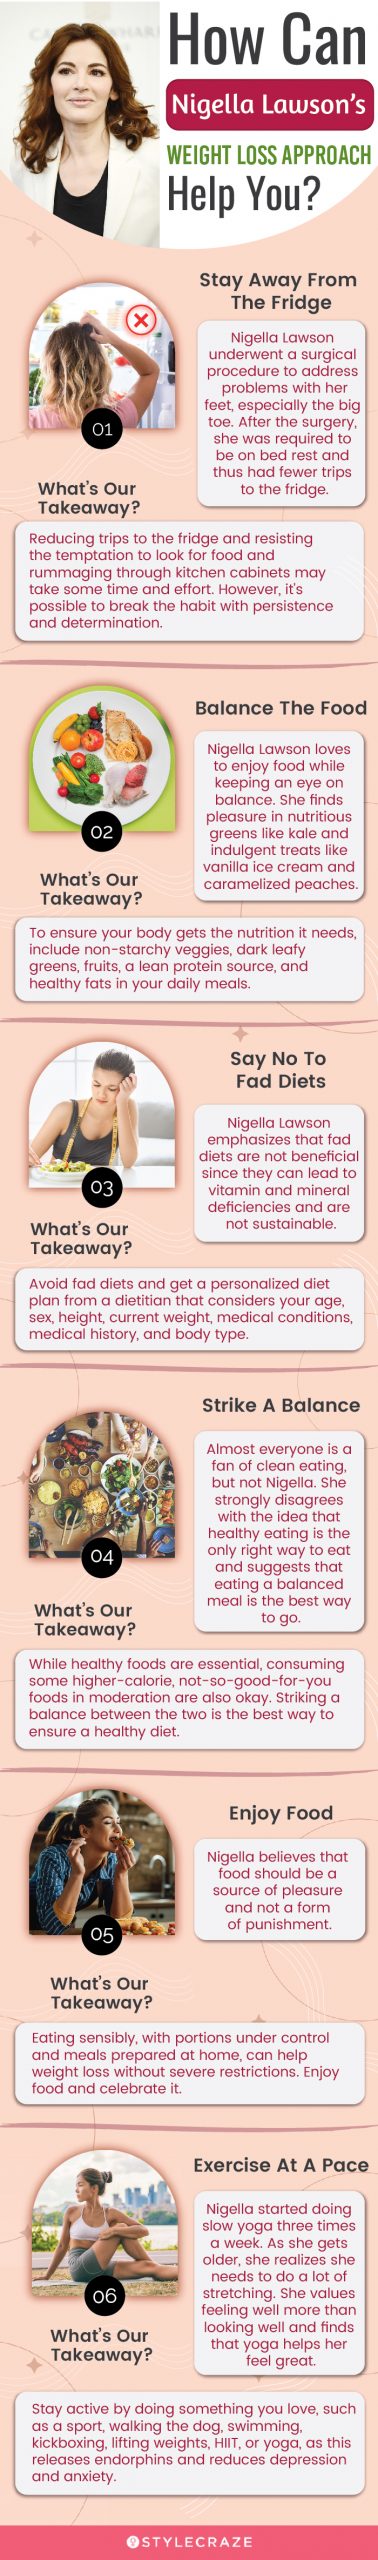 how can nigella lawsons weightloss approach help you (infographic)